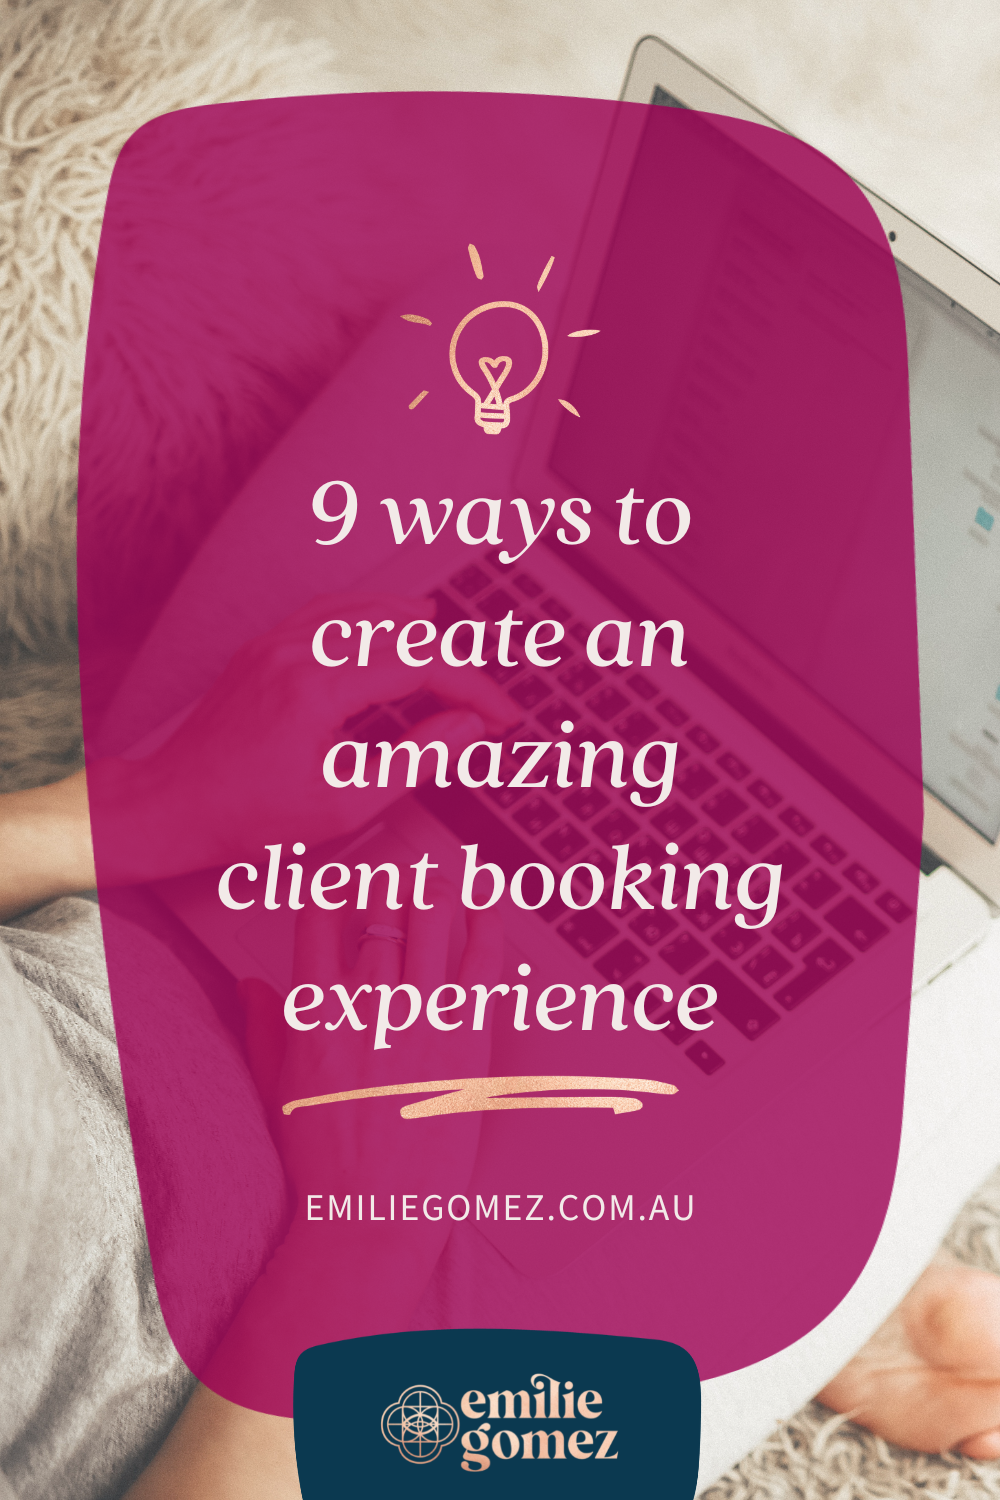 Are you repelling clients with a poor booking system? Often, there’s a lot of room for improvement when it comes to your client booking experience for your business. But where do you start? In this post, I’m sharing 9 ways to create an amazing client booking experience to wow your potential clients. If you’re an entrepreneur, then you need to read this post and make sure your potential clients aren’t deciding not to book because it’s too hard or complicated.